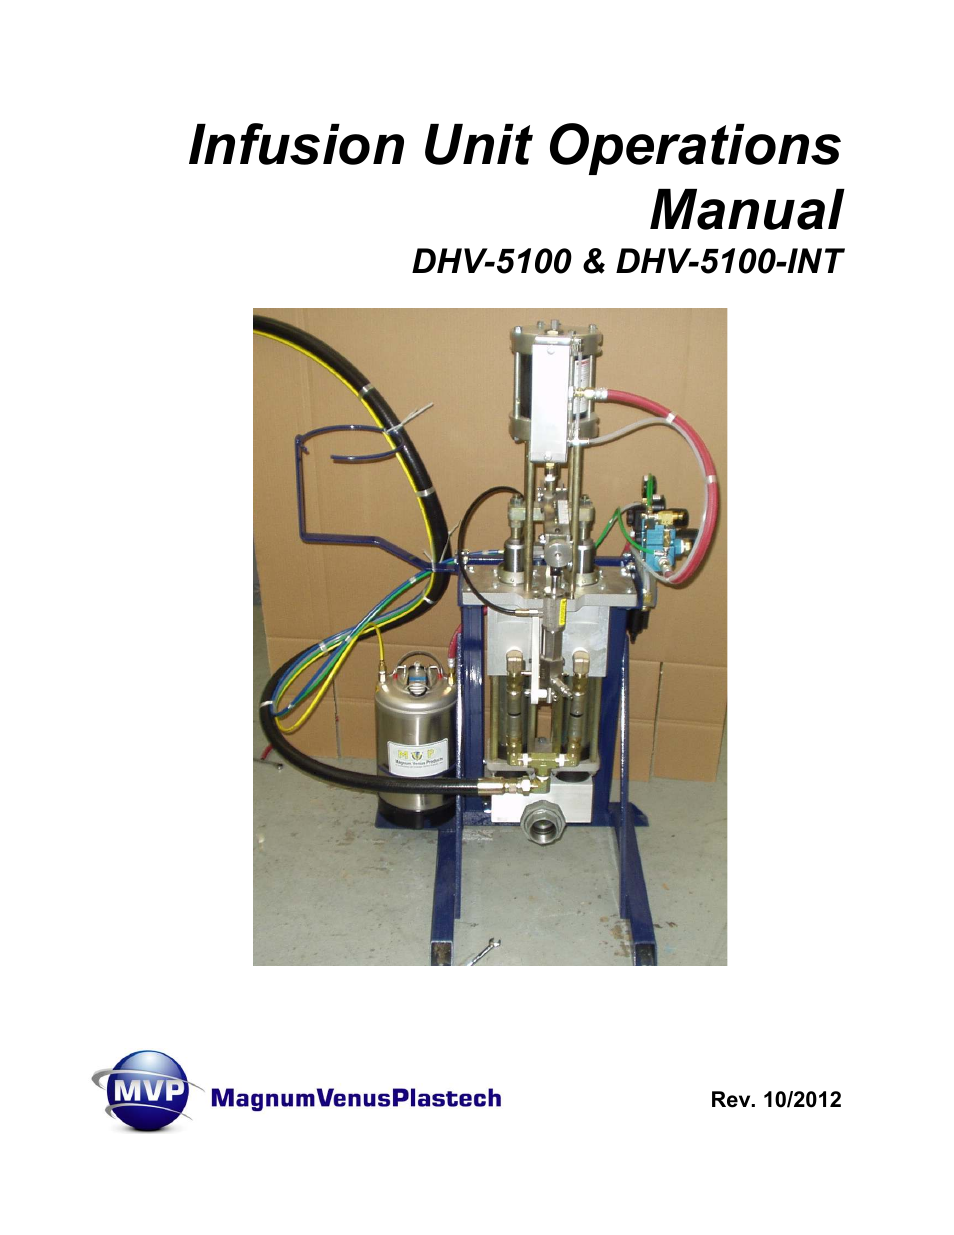 Infusion Unit DHV-5100-INT